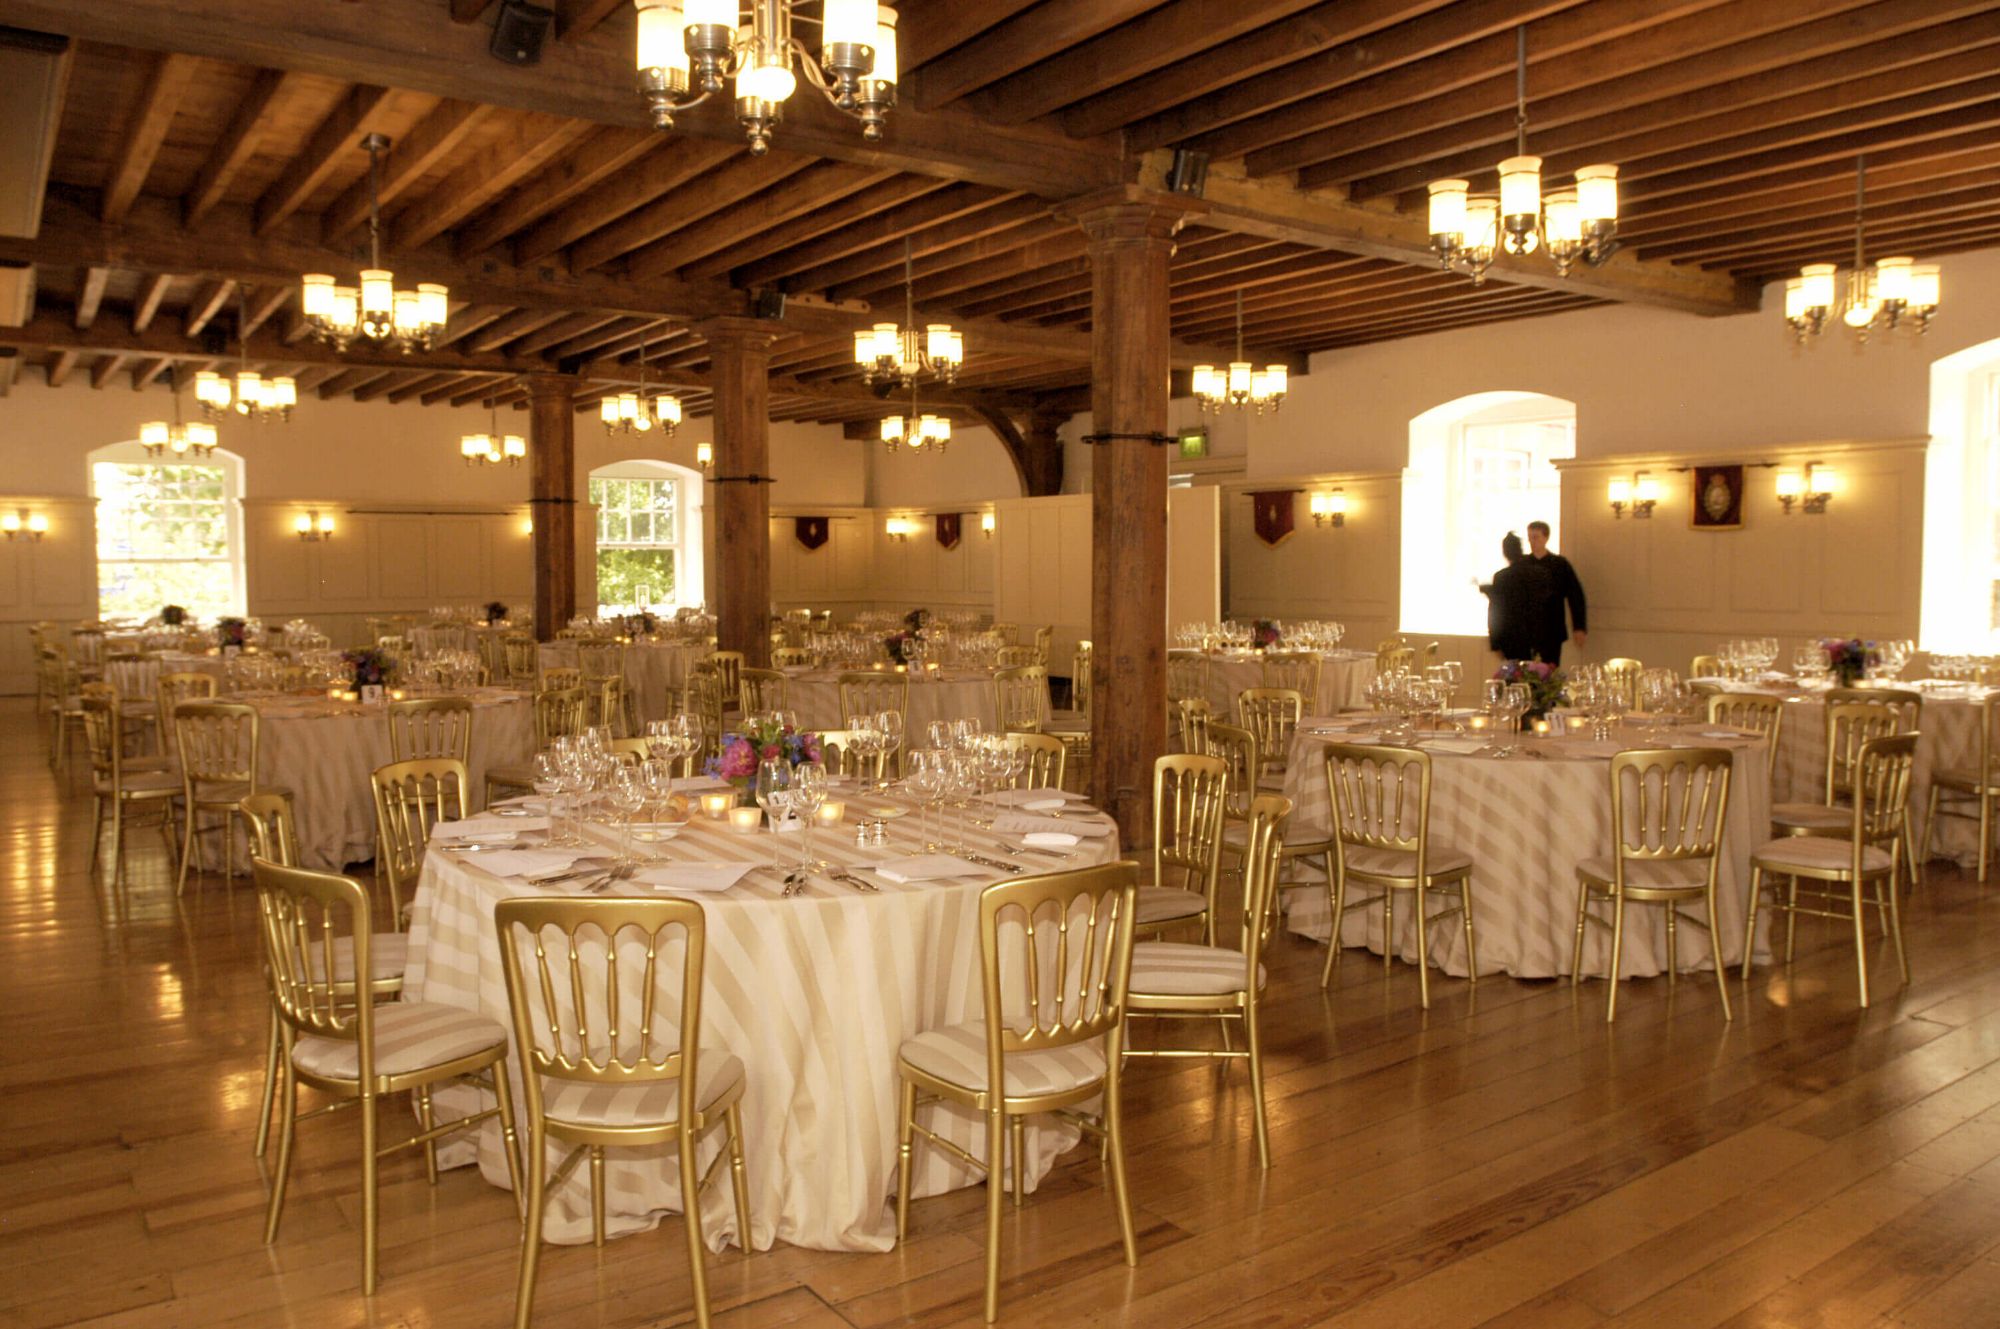 White wedding dining with circular tables, golden chairs and wooden beamed ceiling